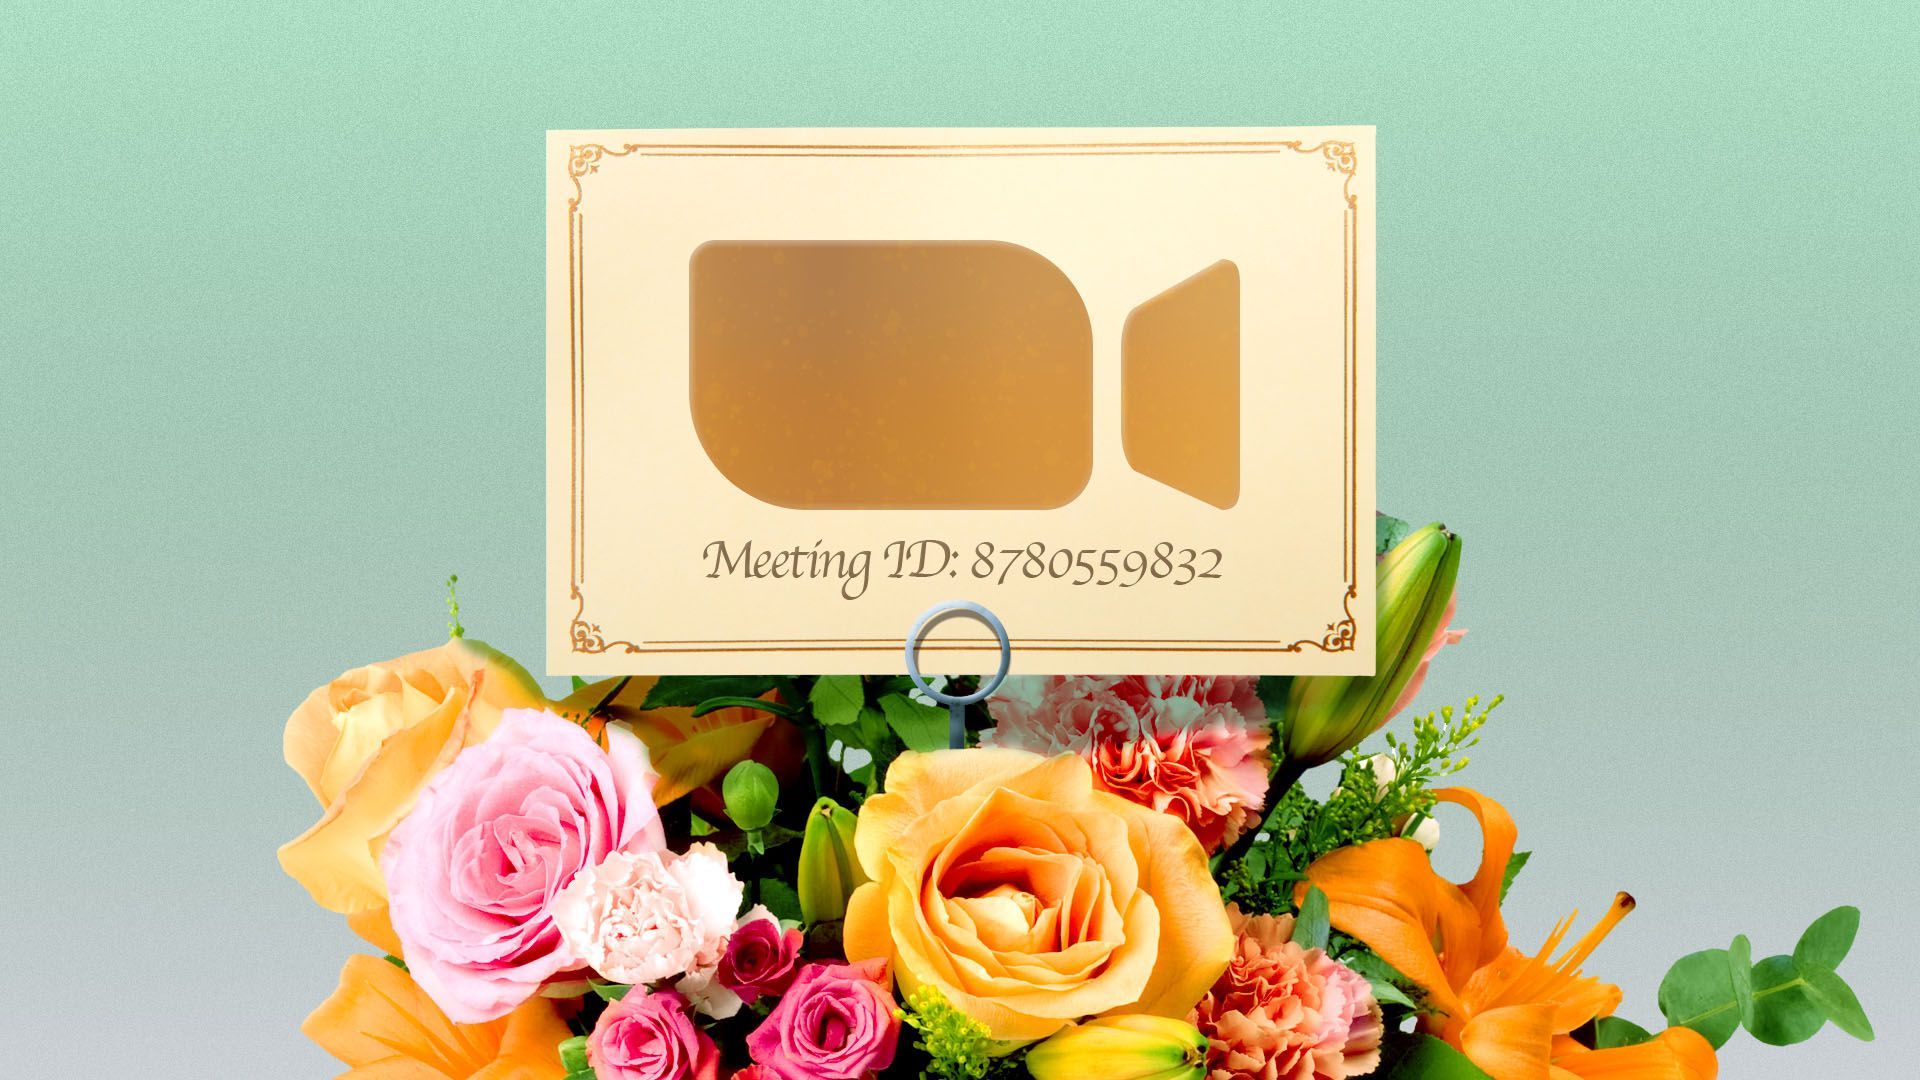 Illustration of a wedding table centerpiece with a zoom icon and meeting ID